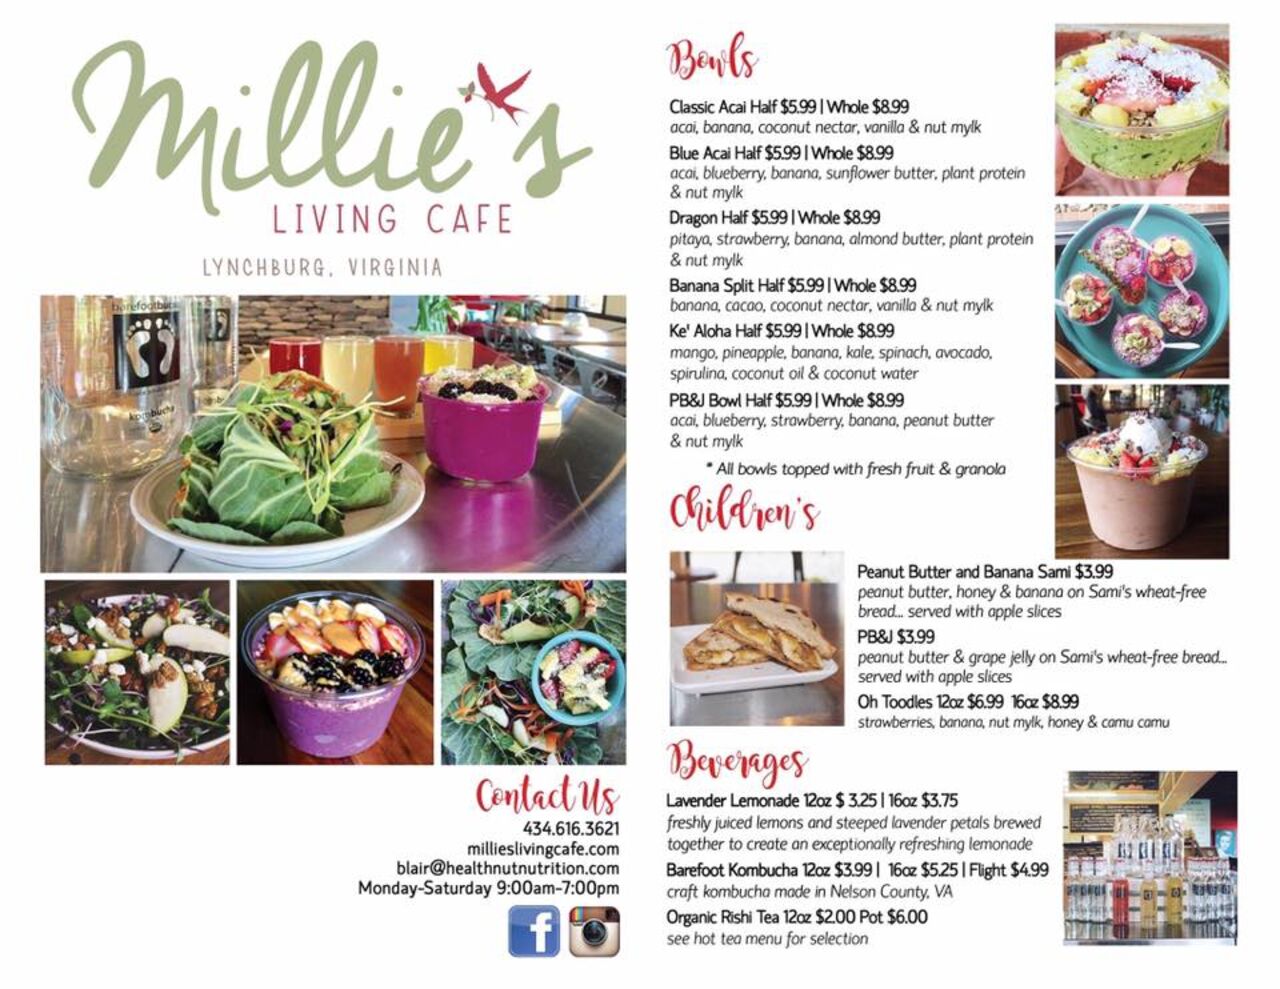 A photo of Millie's Living Cafe